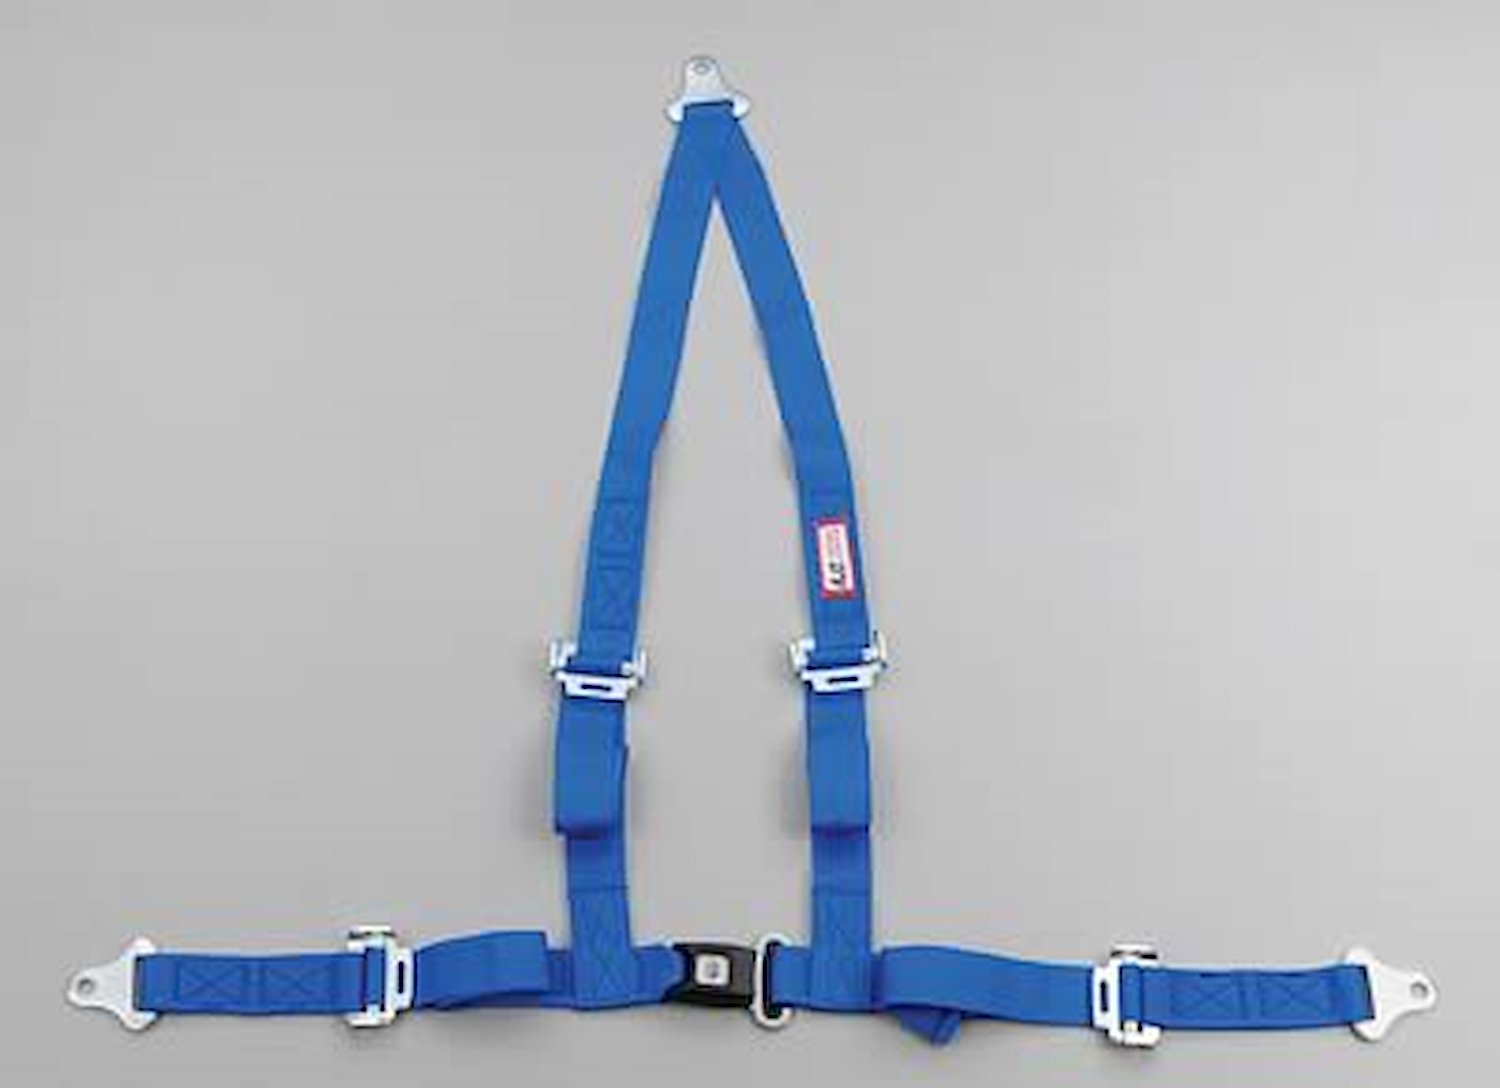 NON-SFI B&T HARNESS 2 PULL DOWN Lap Belt 2 S. H. Y FLOOR Mount ALL WRAP ENDS w/STERNUM STRAP BLUE